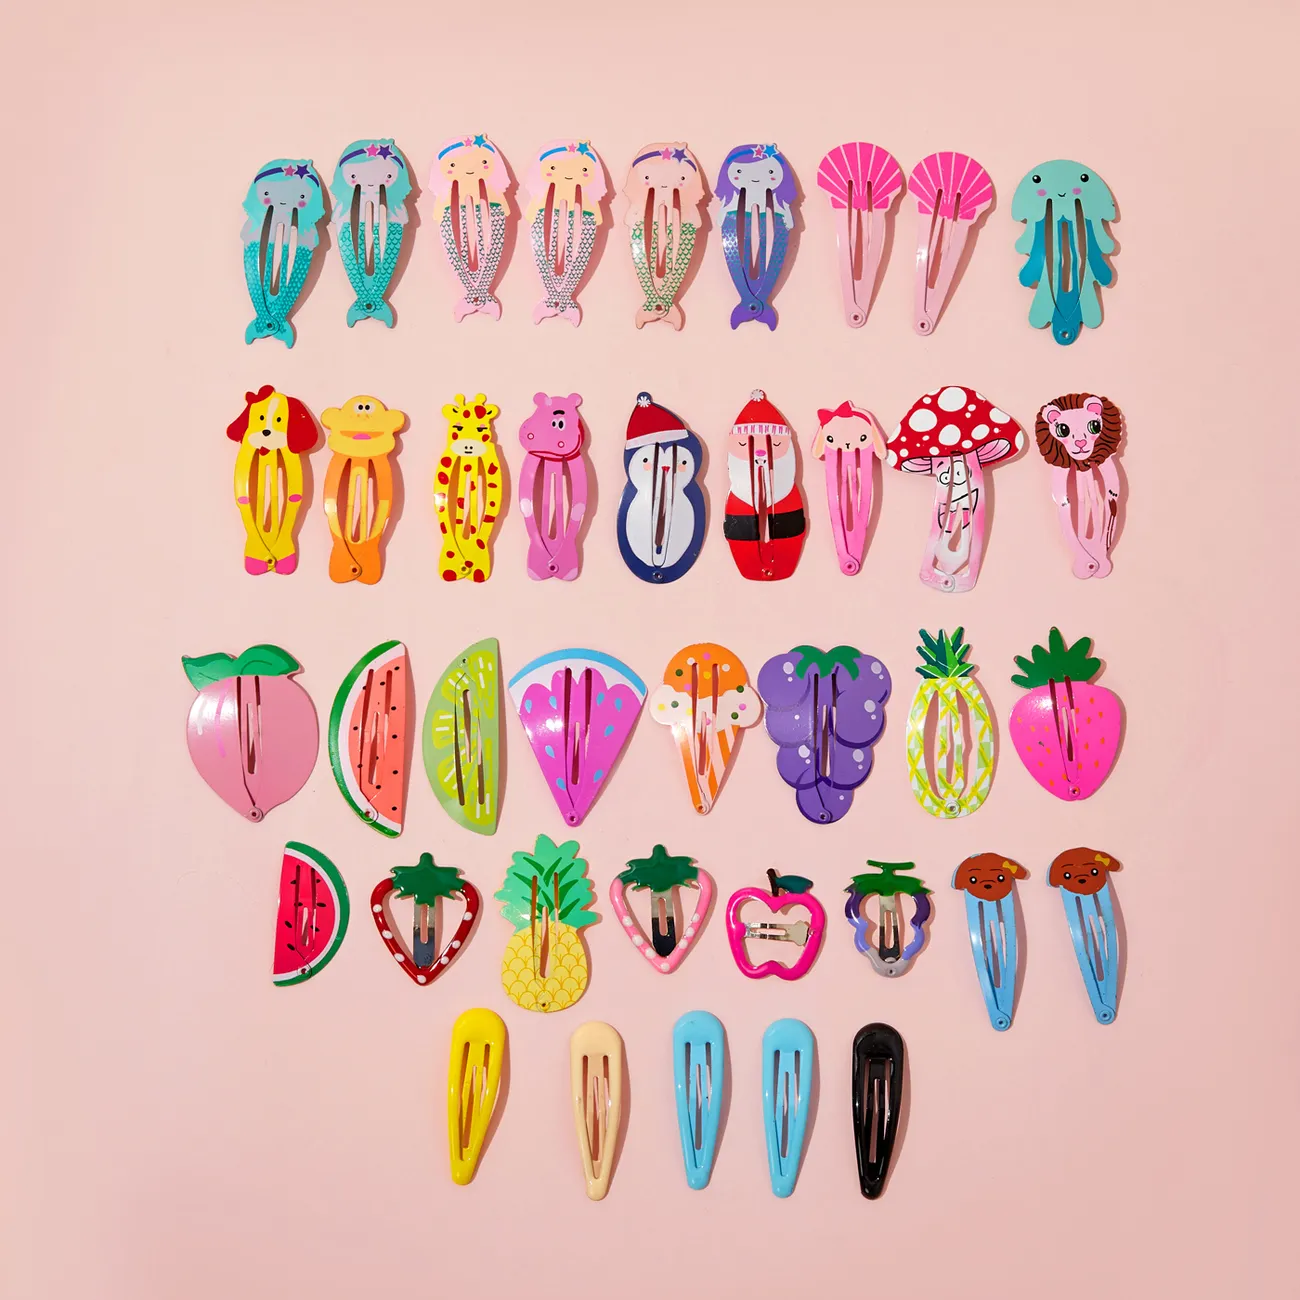 25-pcs Cute Candy Color Cartoon Design Hair Clips for Girls Color block big image 1